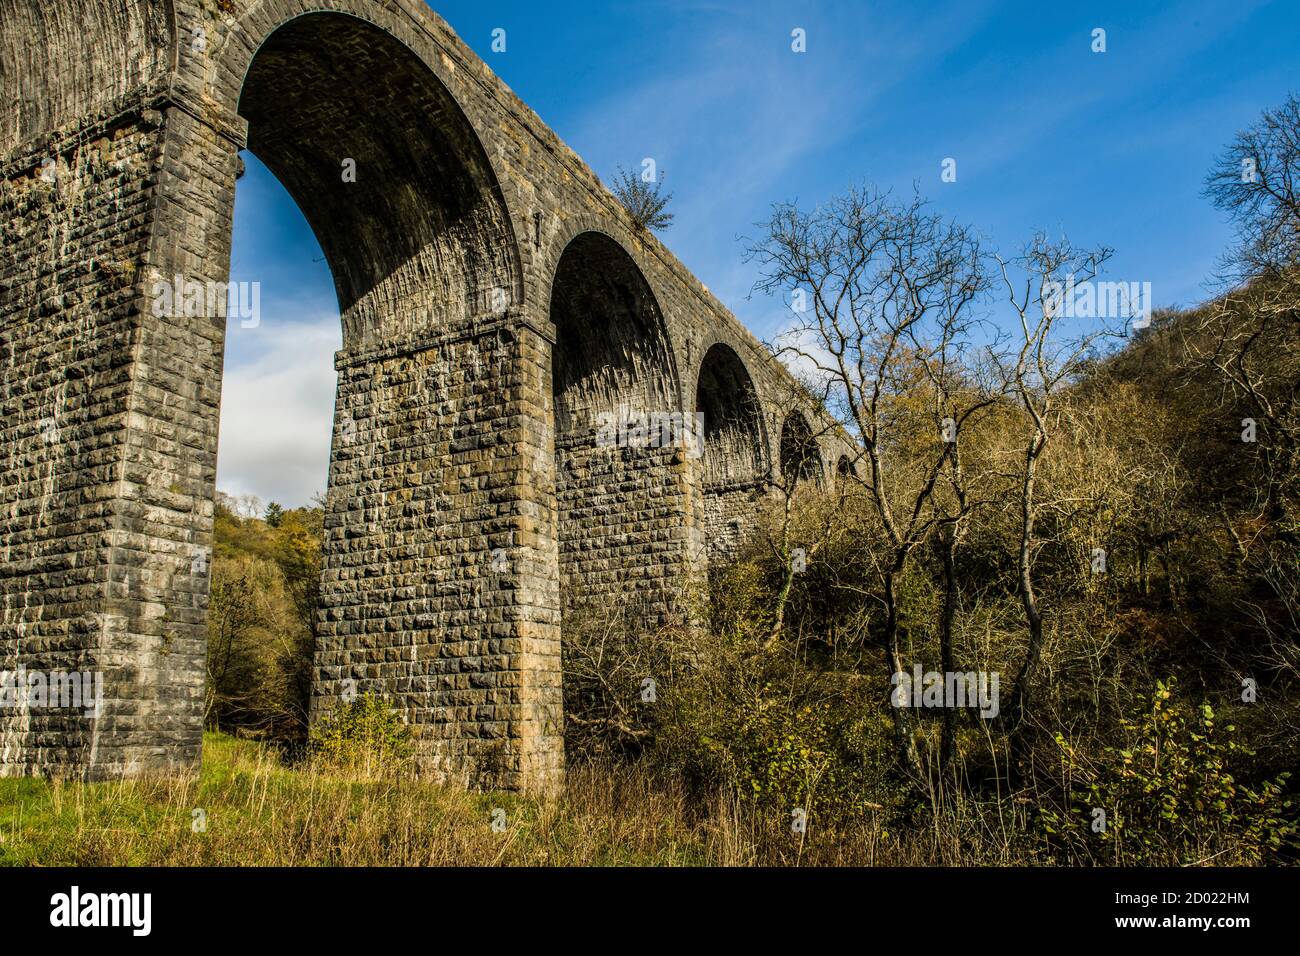 Pontsarn Viaduct, now disused, but previously was the railwat bridge that carried the trains over to and beyond Merthyr Tydfil from Brecon and beyond,. Stock Photo